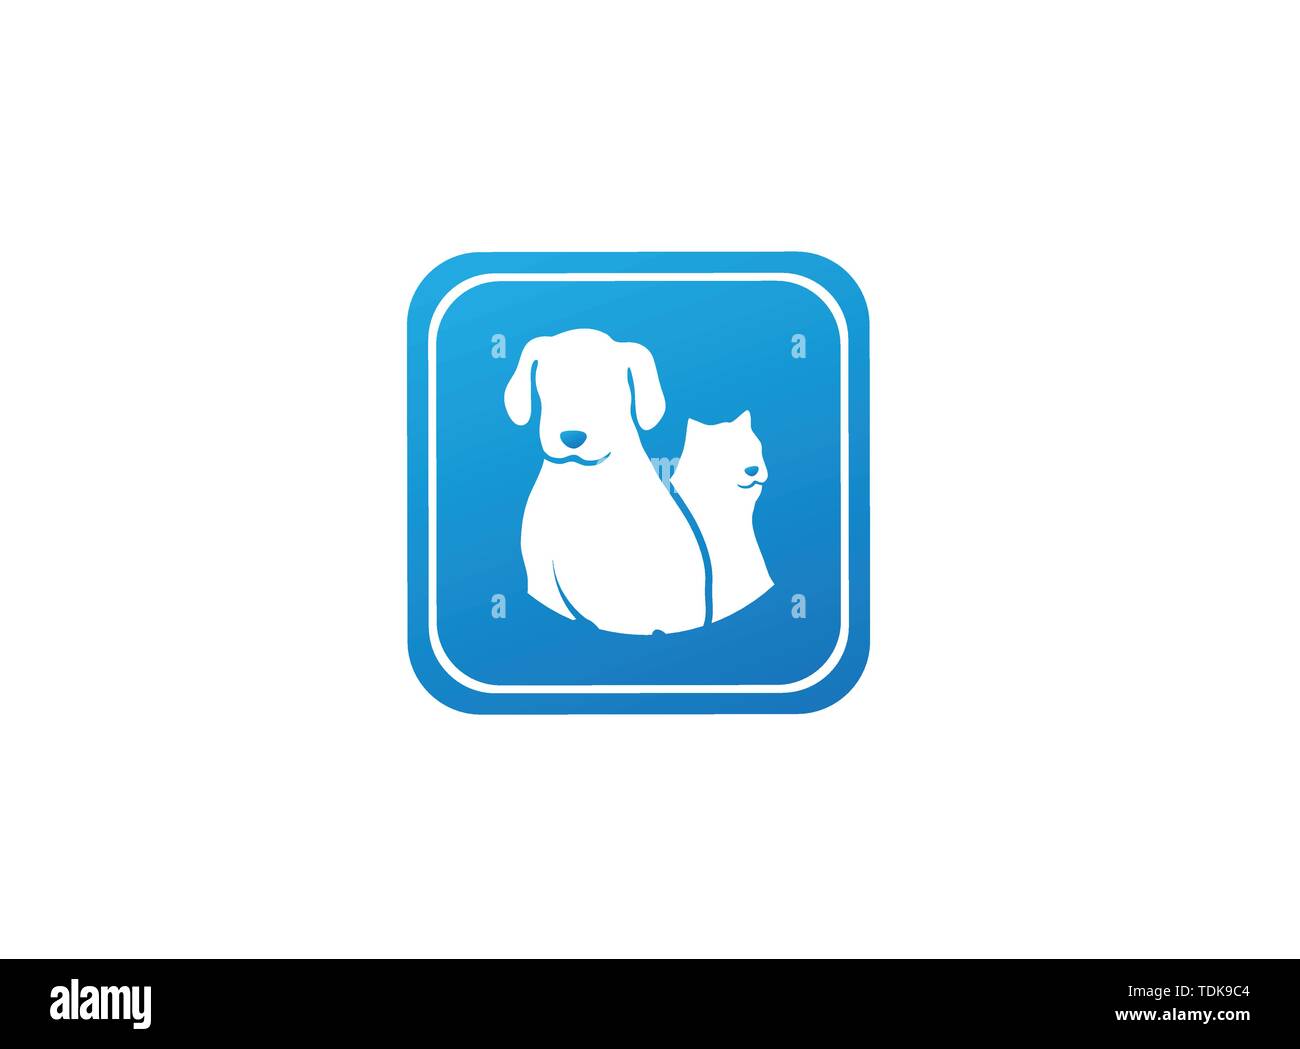 Dog beside cat a friendly pet family logo design illustration in a shape icon Stock Vector